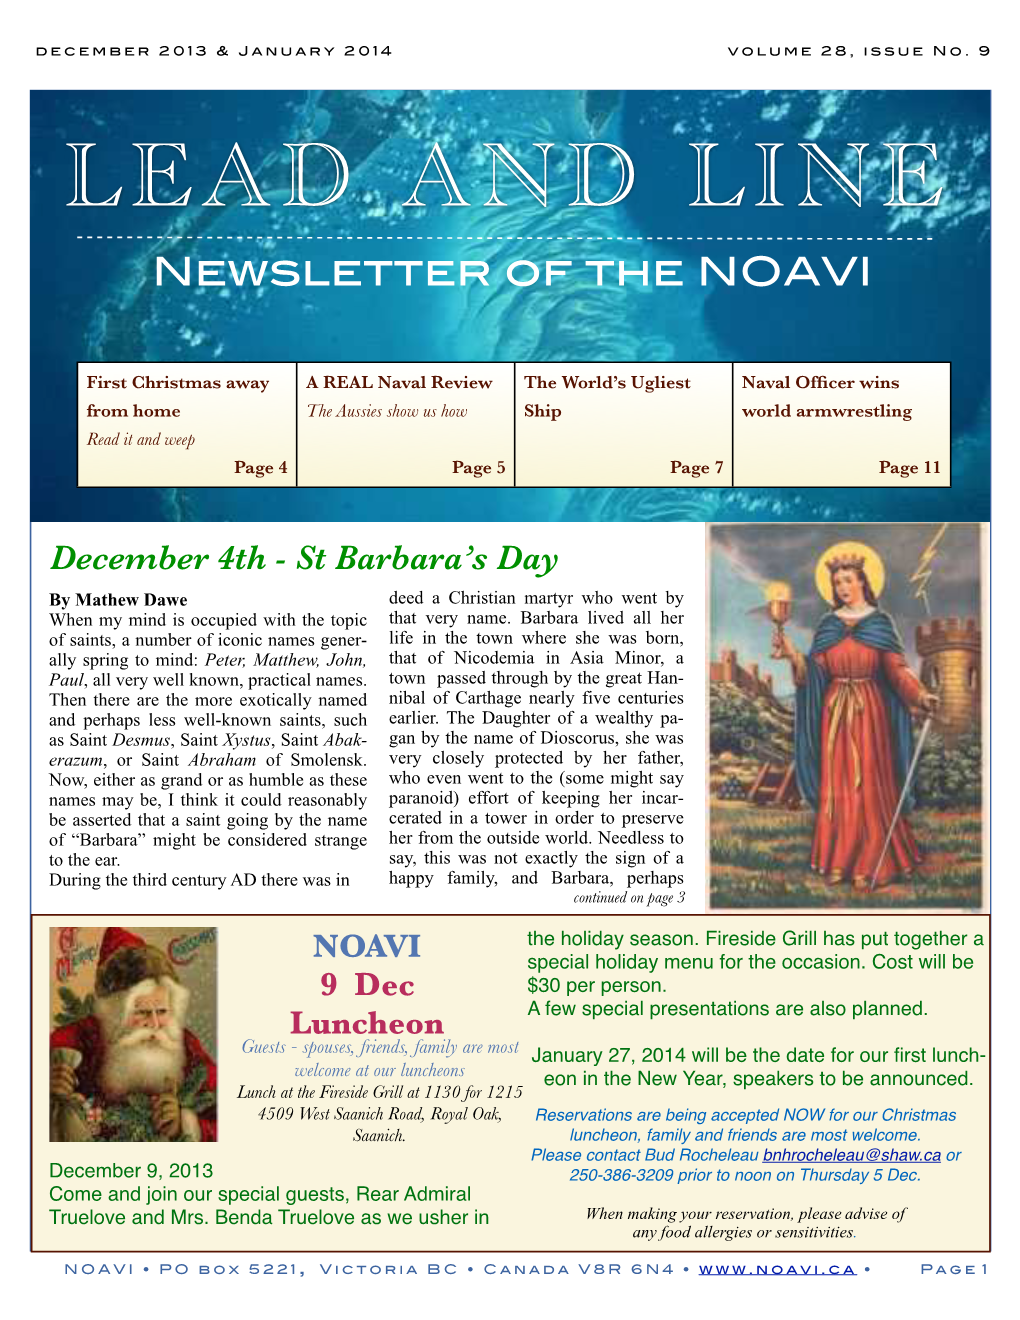 Lead and Line December 2013